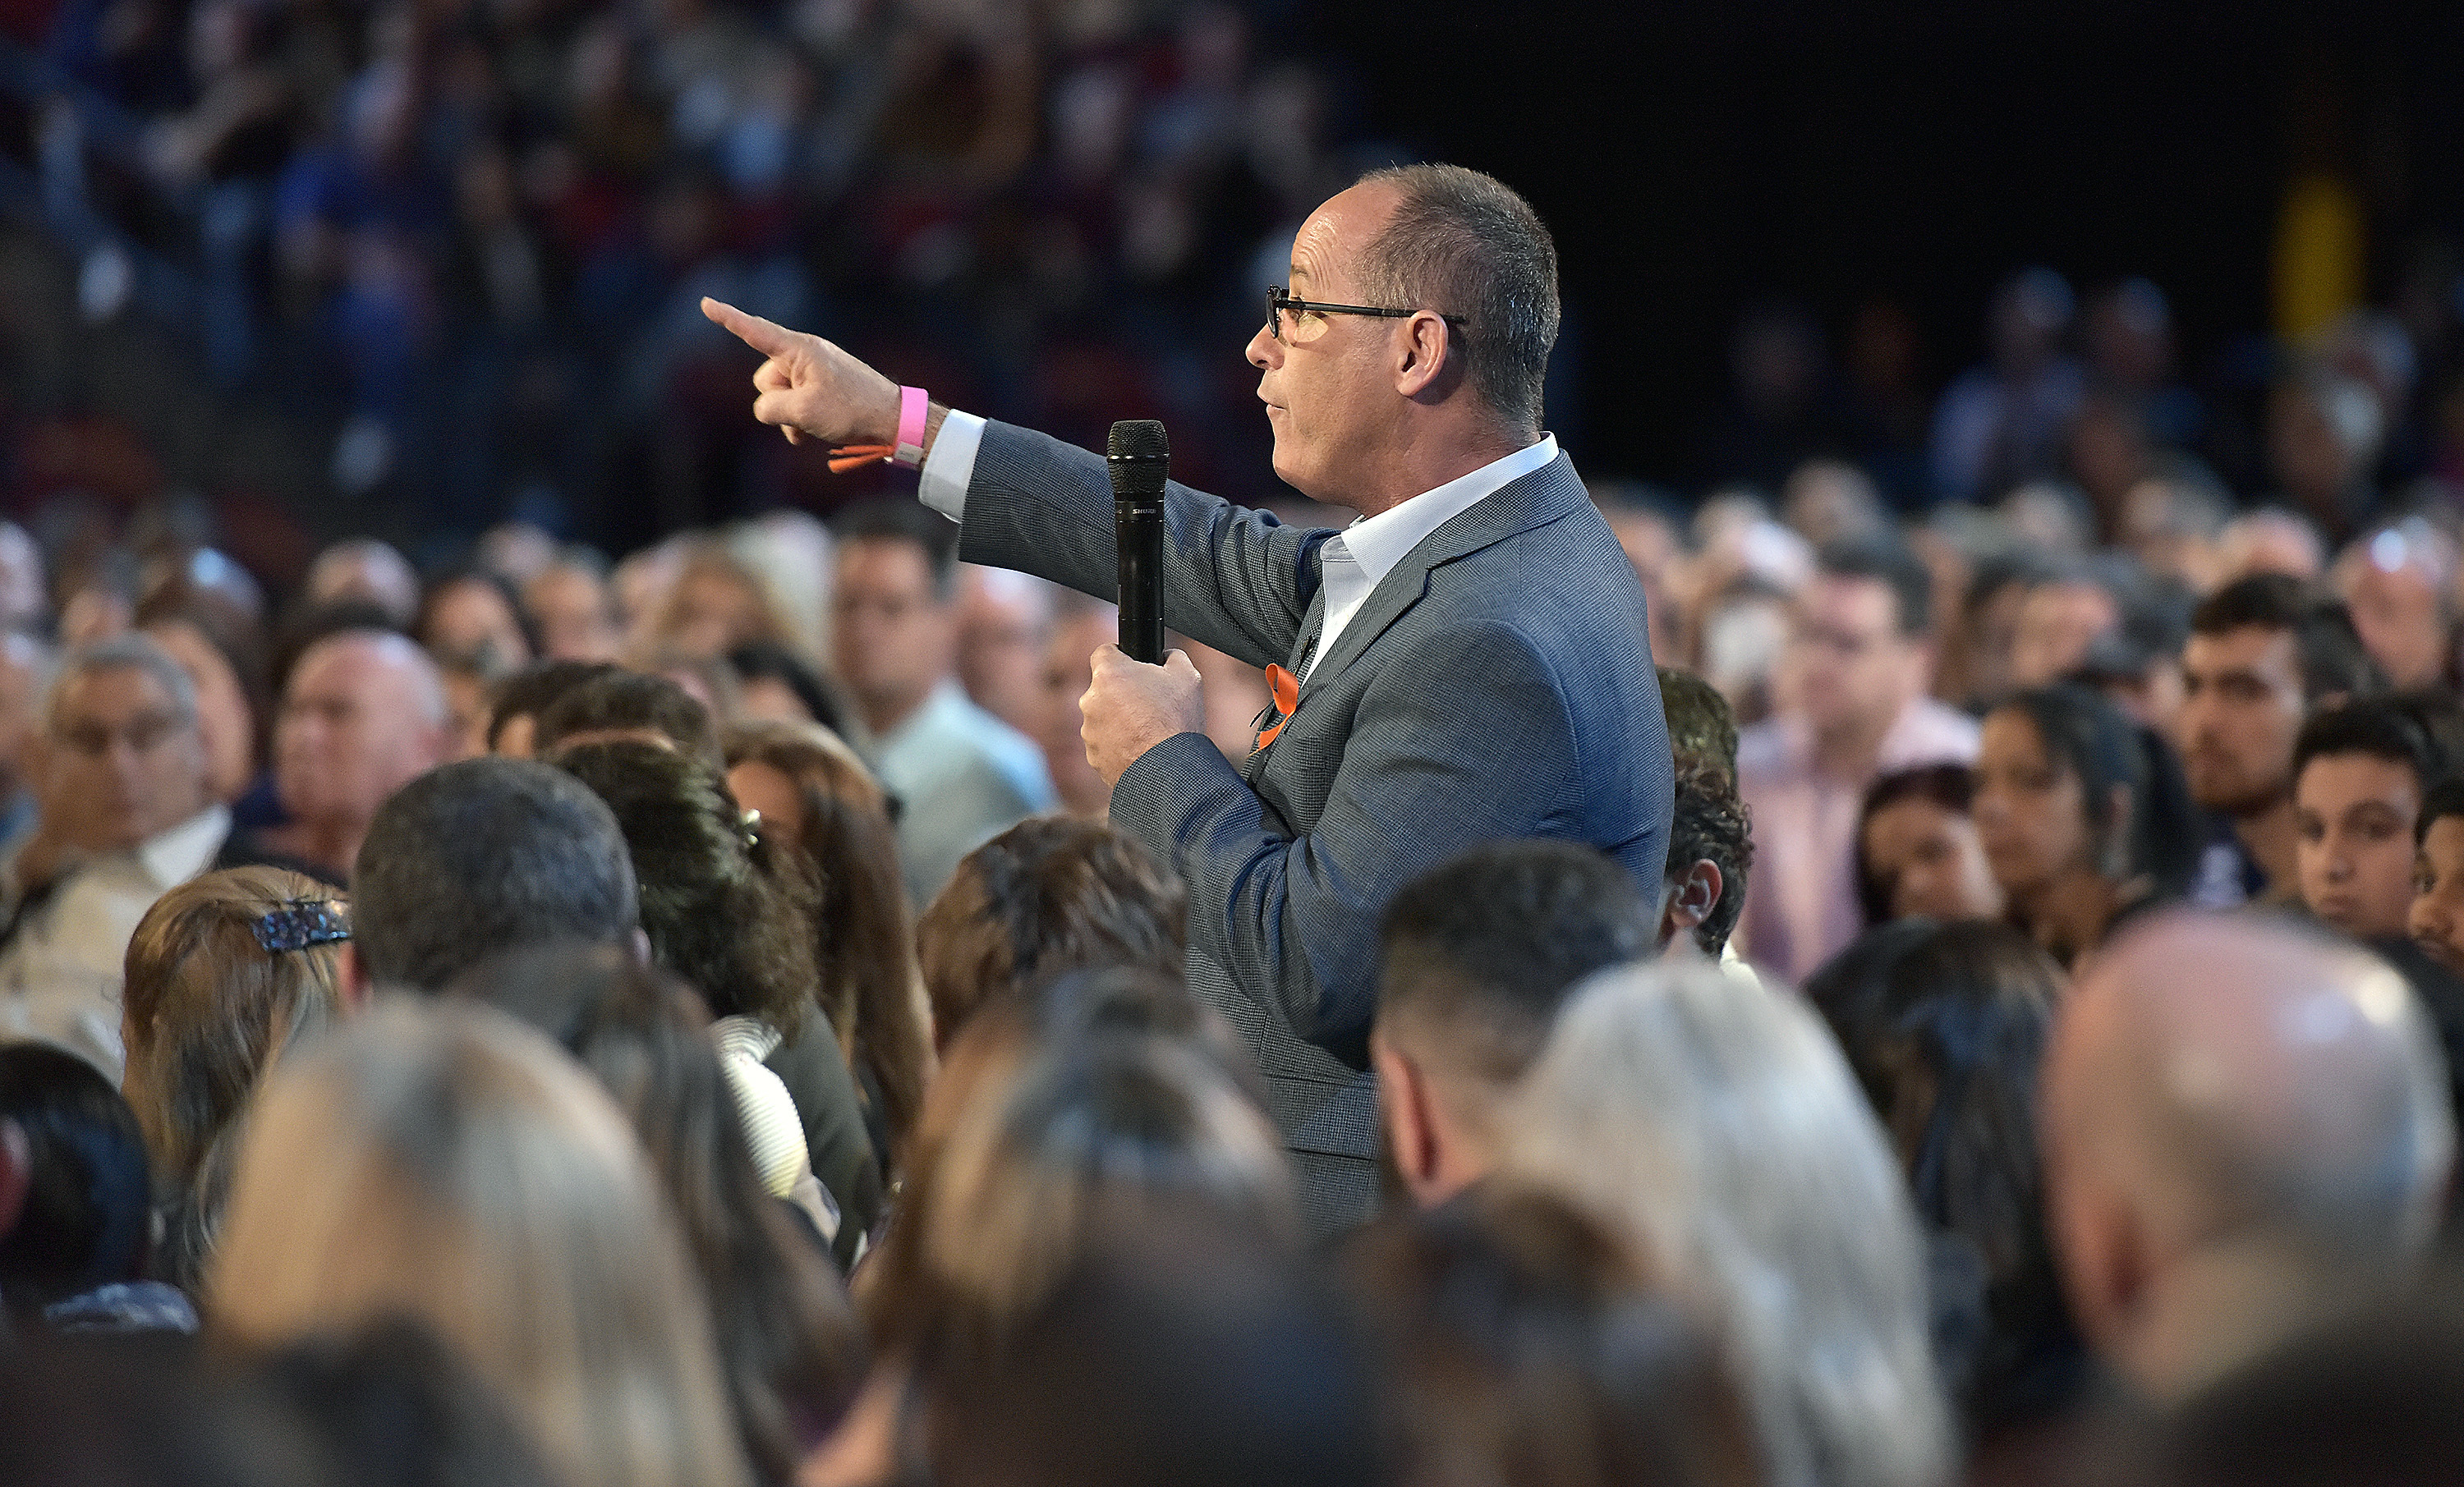 Man in the audience stands up to ask a question in a microphone pointing up to the stage